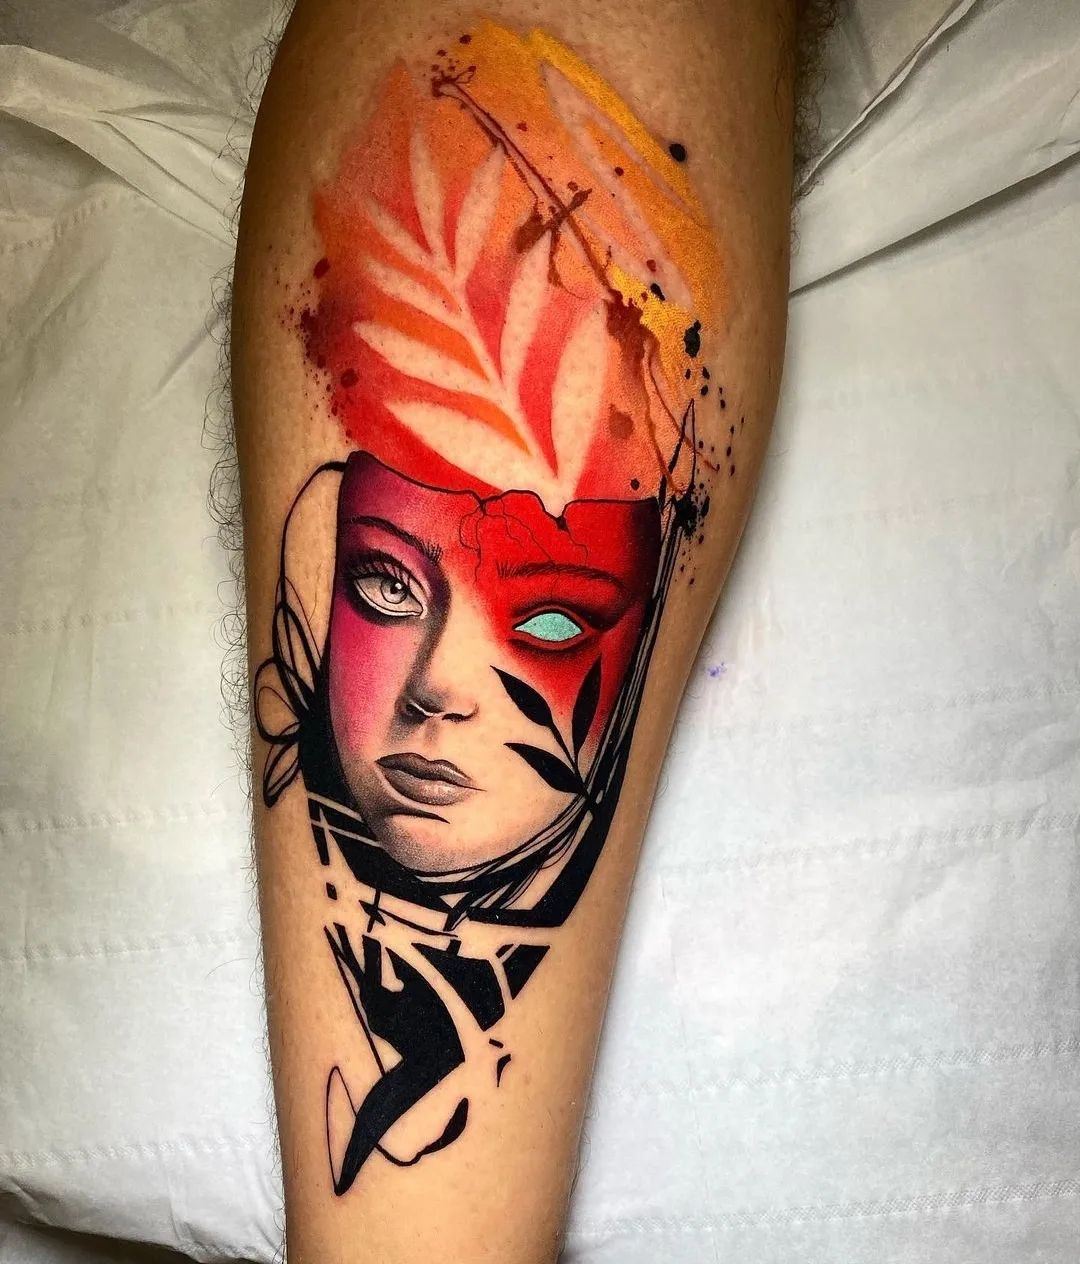 Stunning abstract piece by Noemi done during the Big London Tattoo Show last week. Thanks so much to Conor for the trust and hanging back with us on both days, was lovely to meet you!

noemi_tattoo 
biglondontattooshow 
totaltattoo

                   